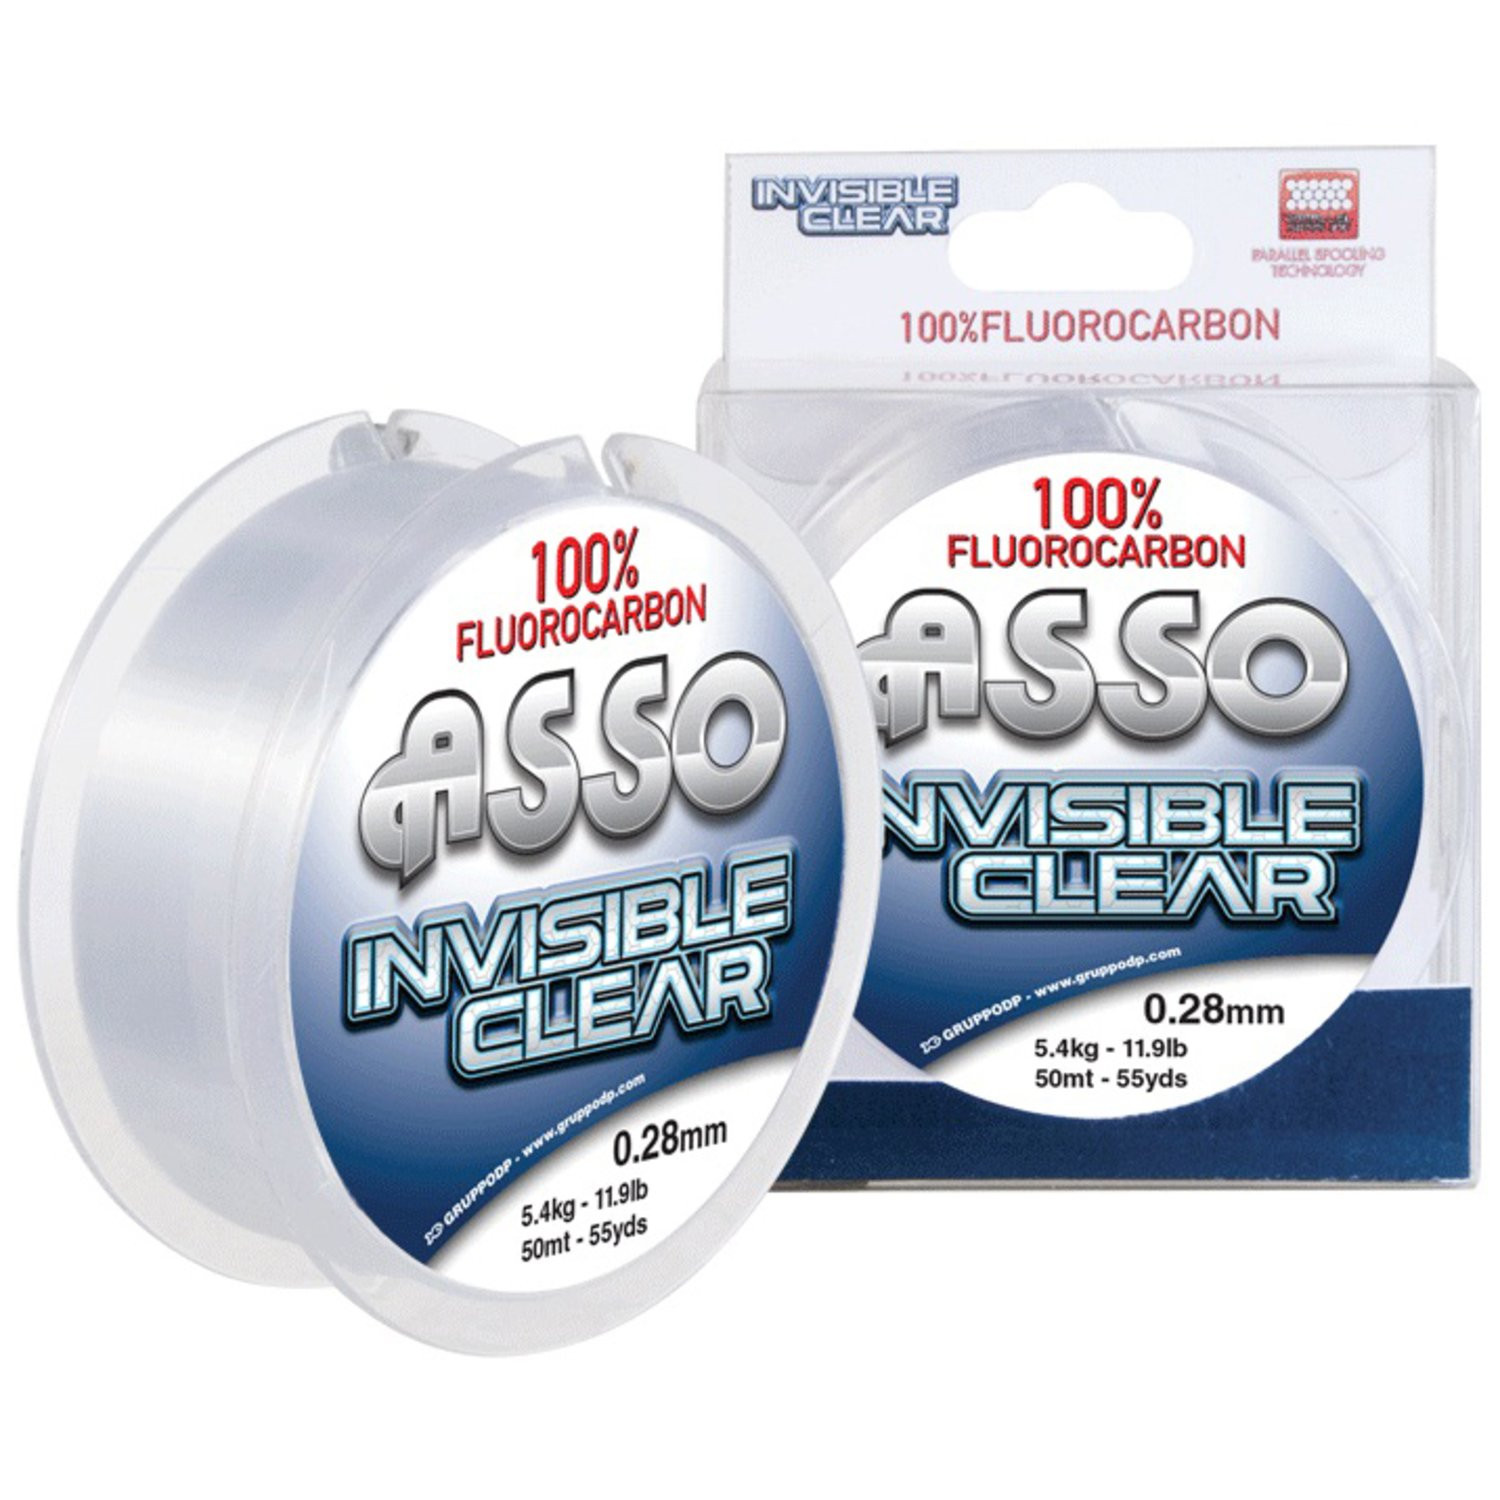 Fir ASSO Fluorocarbon Invisible Clear 0.21mm 50m, 3.4kg